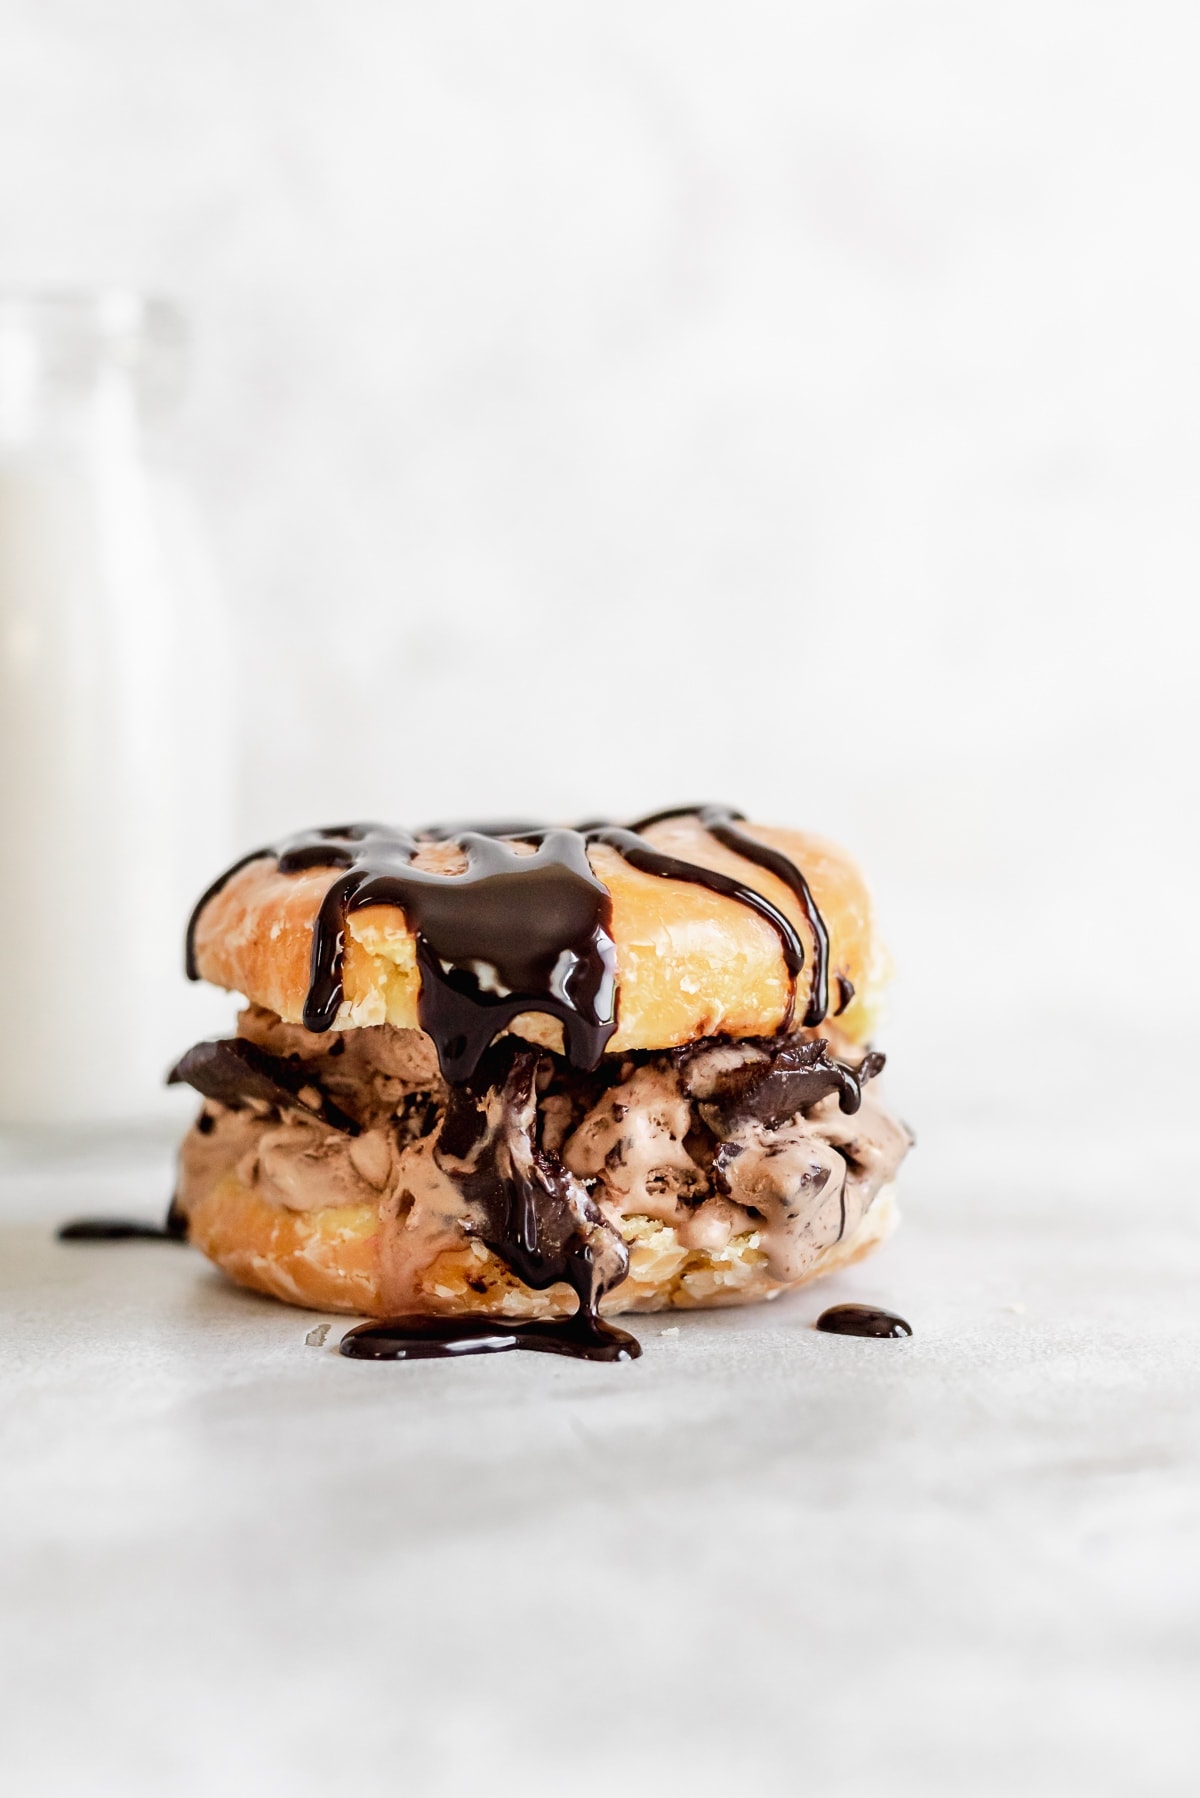 donut ice cream sandwich covered in chocolate